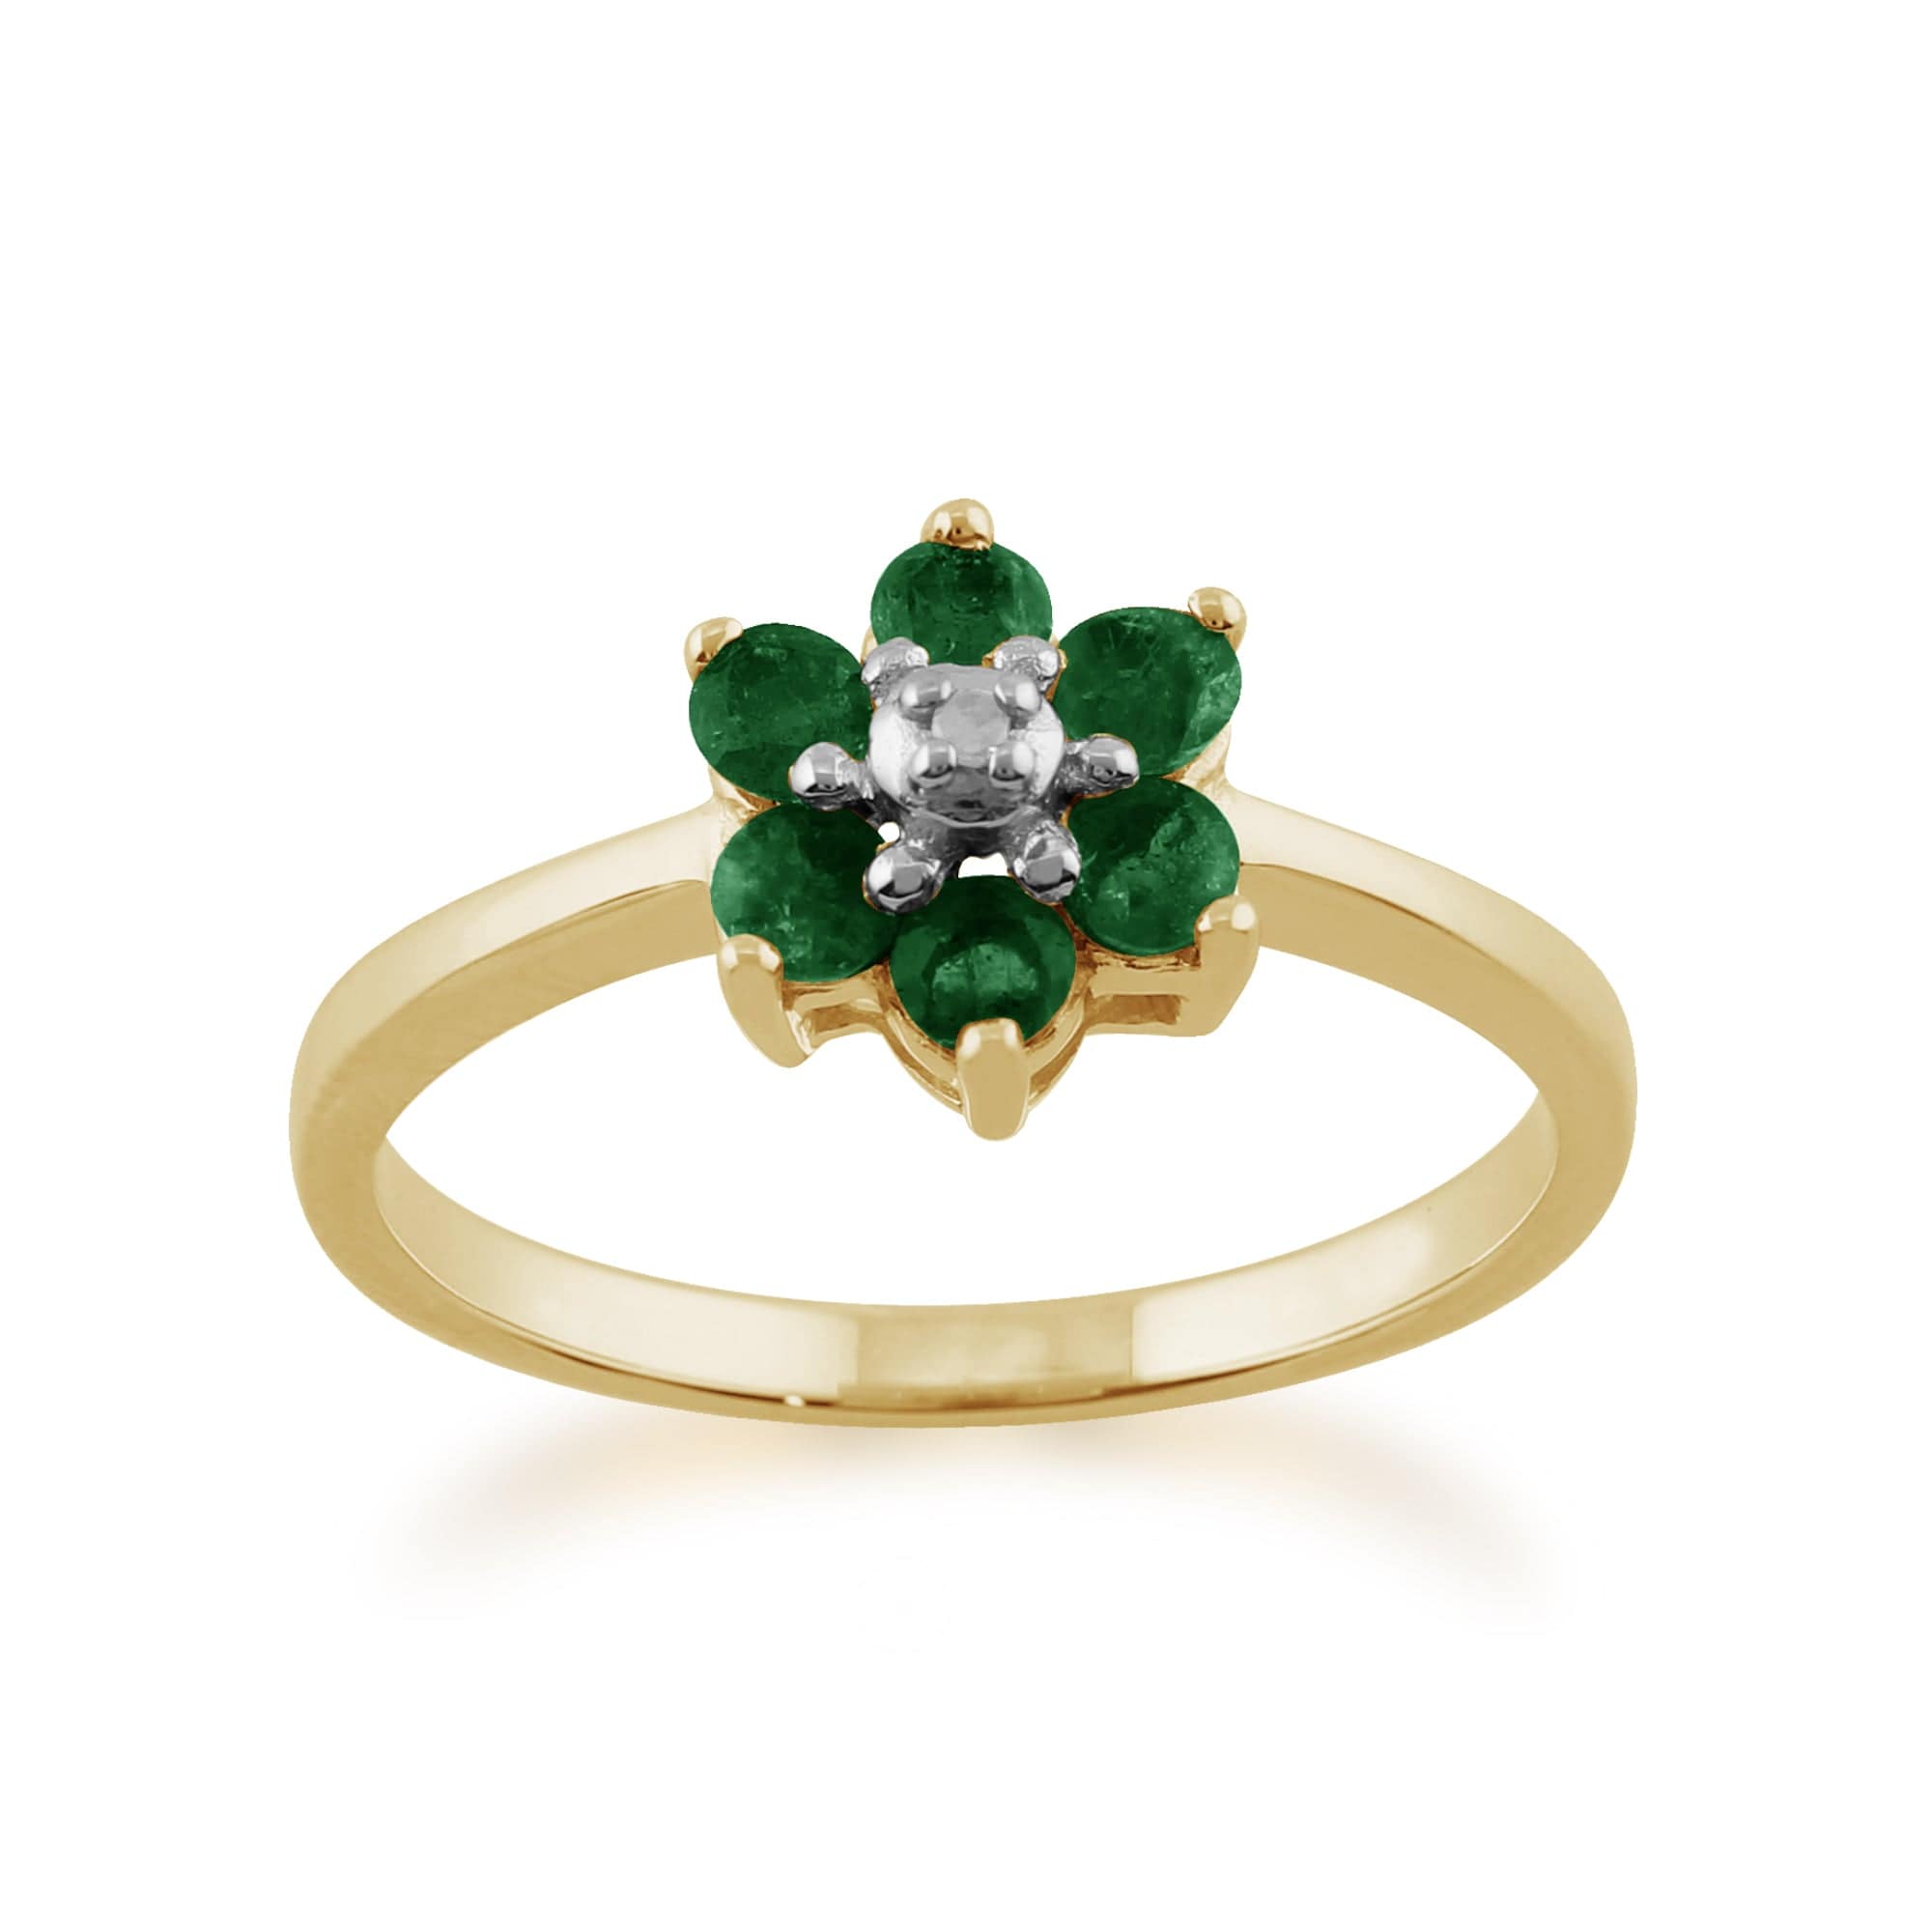 Floral Round Emerald & Diamond Cluster Ring in 9ct Yellow Gold - Gemondo